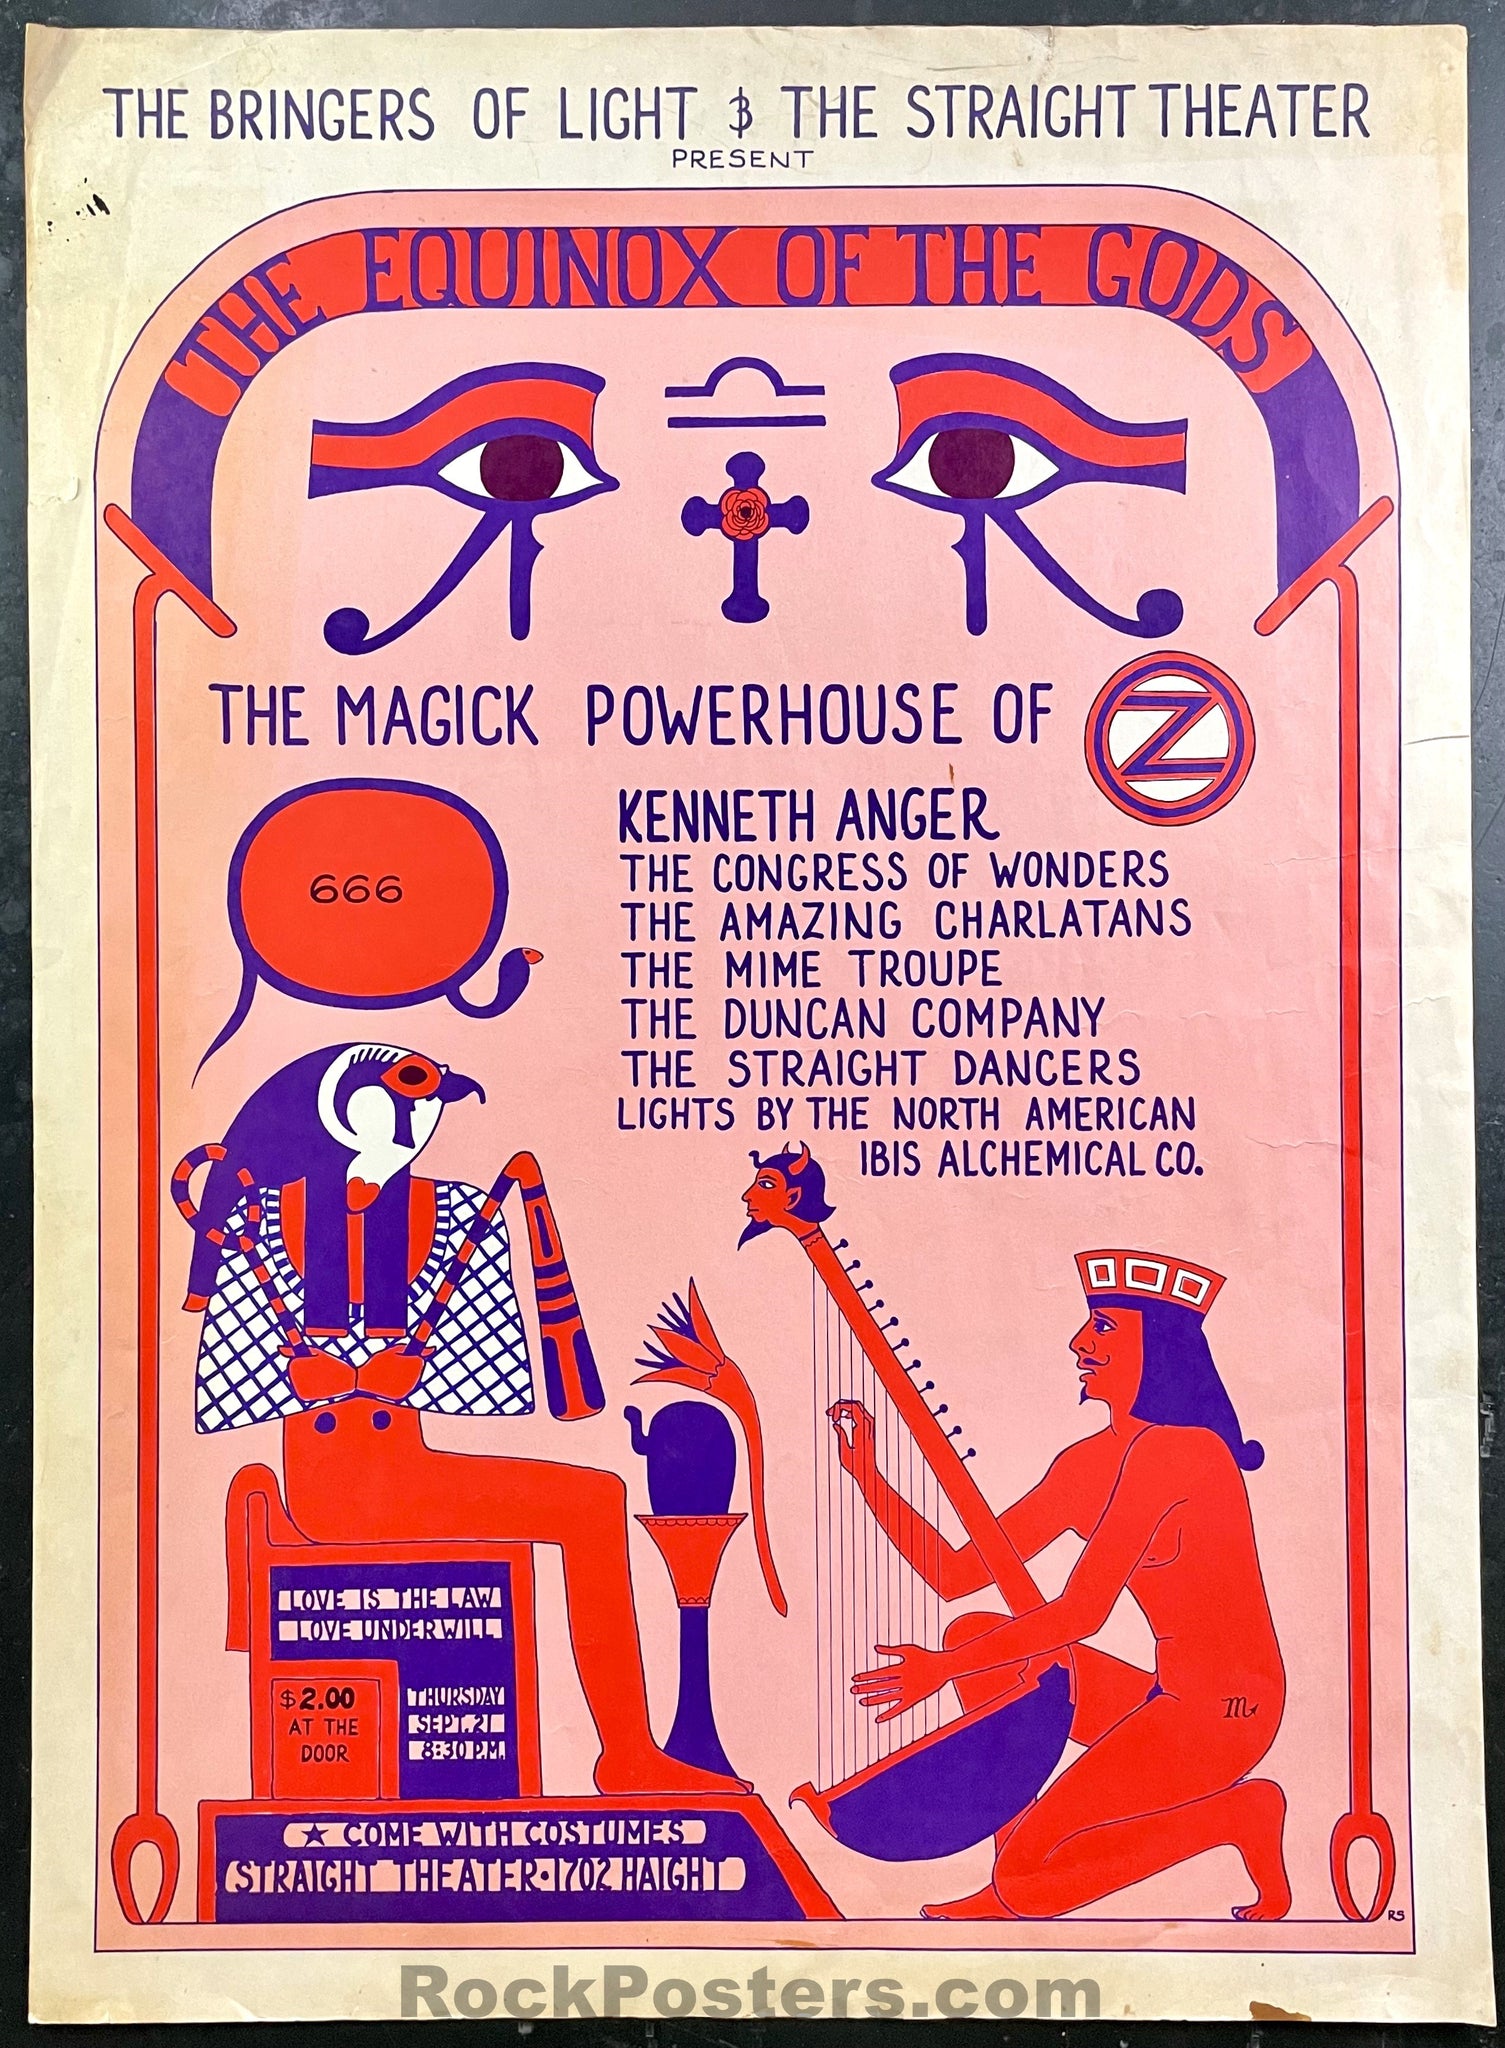 AUCTION - AOR 2.226 - Charlatans Kenneth Anger - 1967 Poster - Straight Theater - Very Good